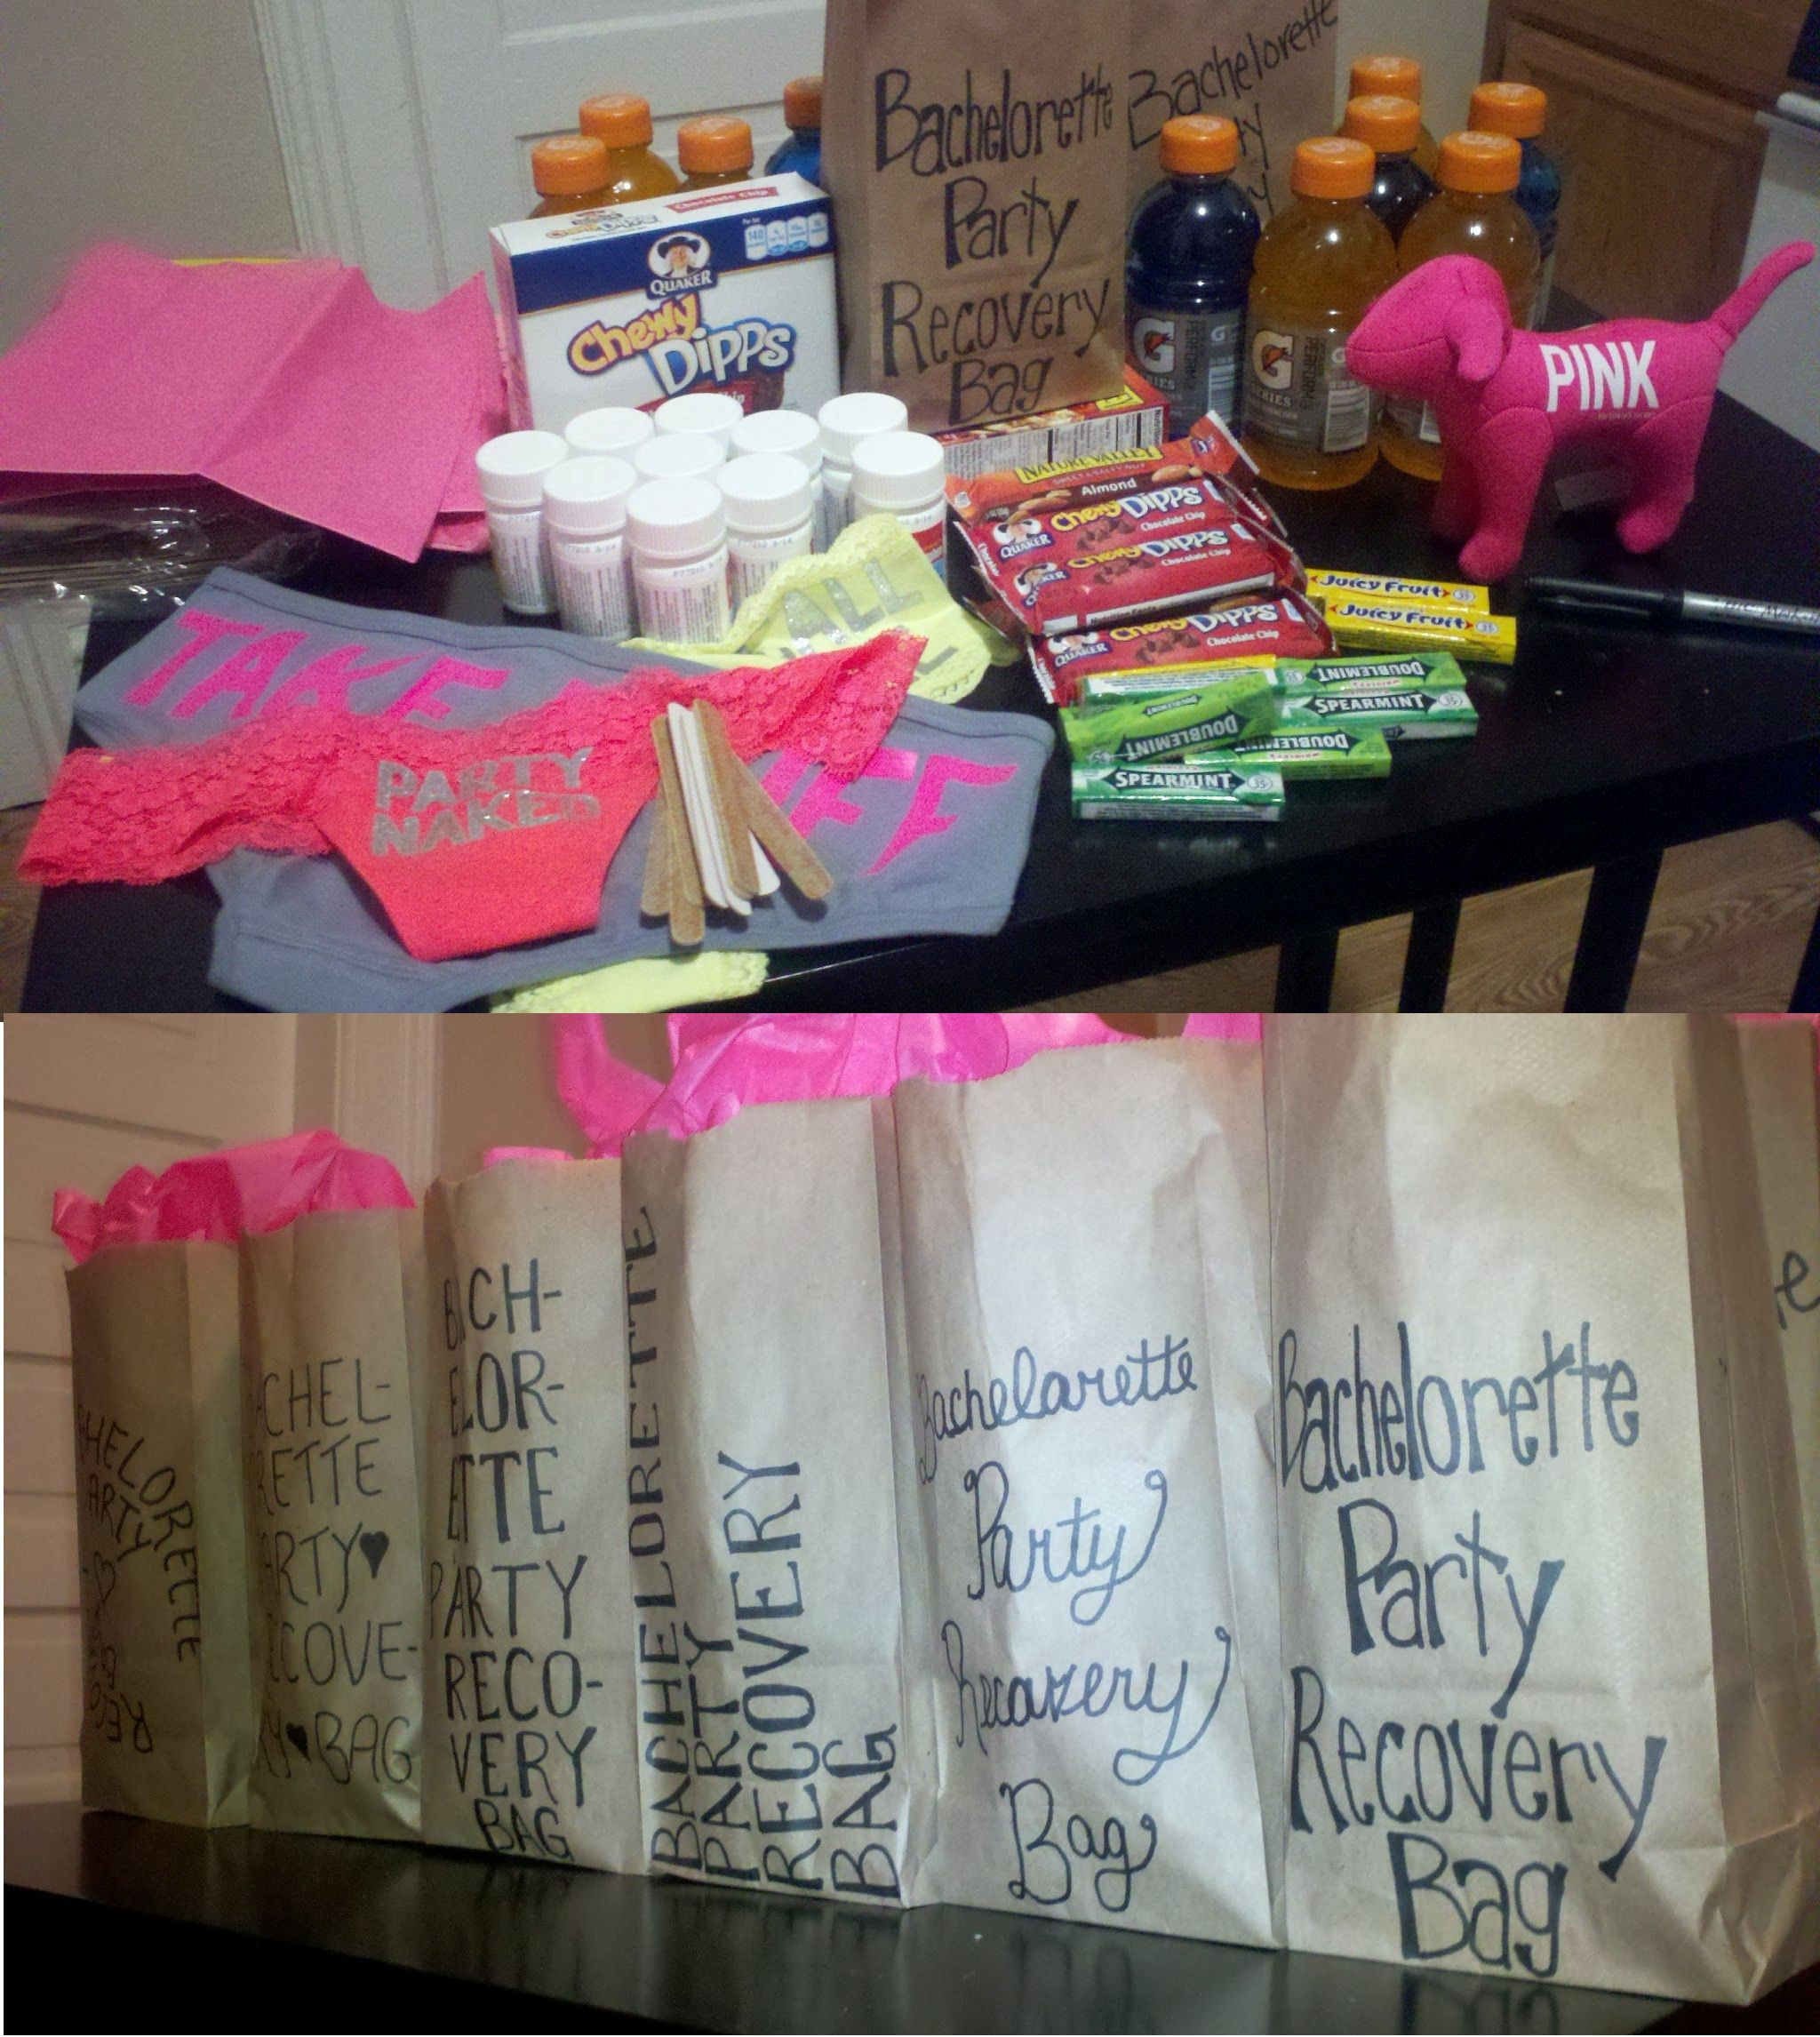 April Bachelorette Party Ideas
 Bachelorette Party Favors Recovery Bags with all the